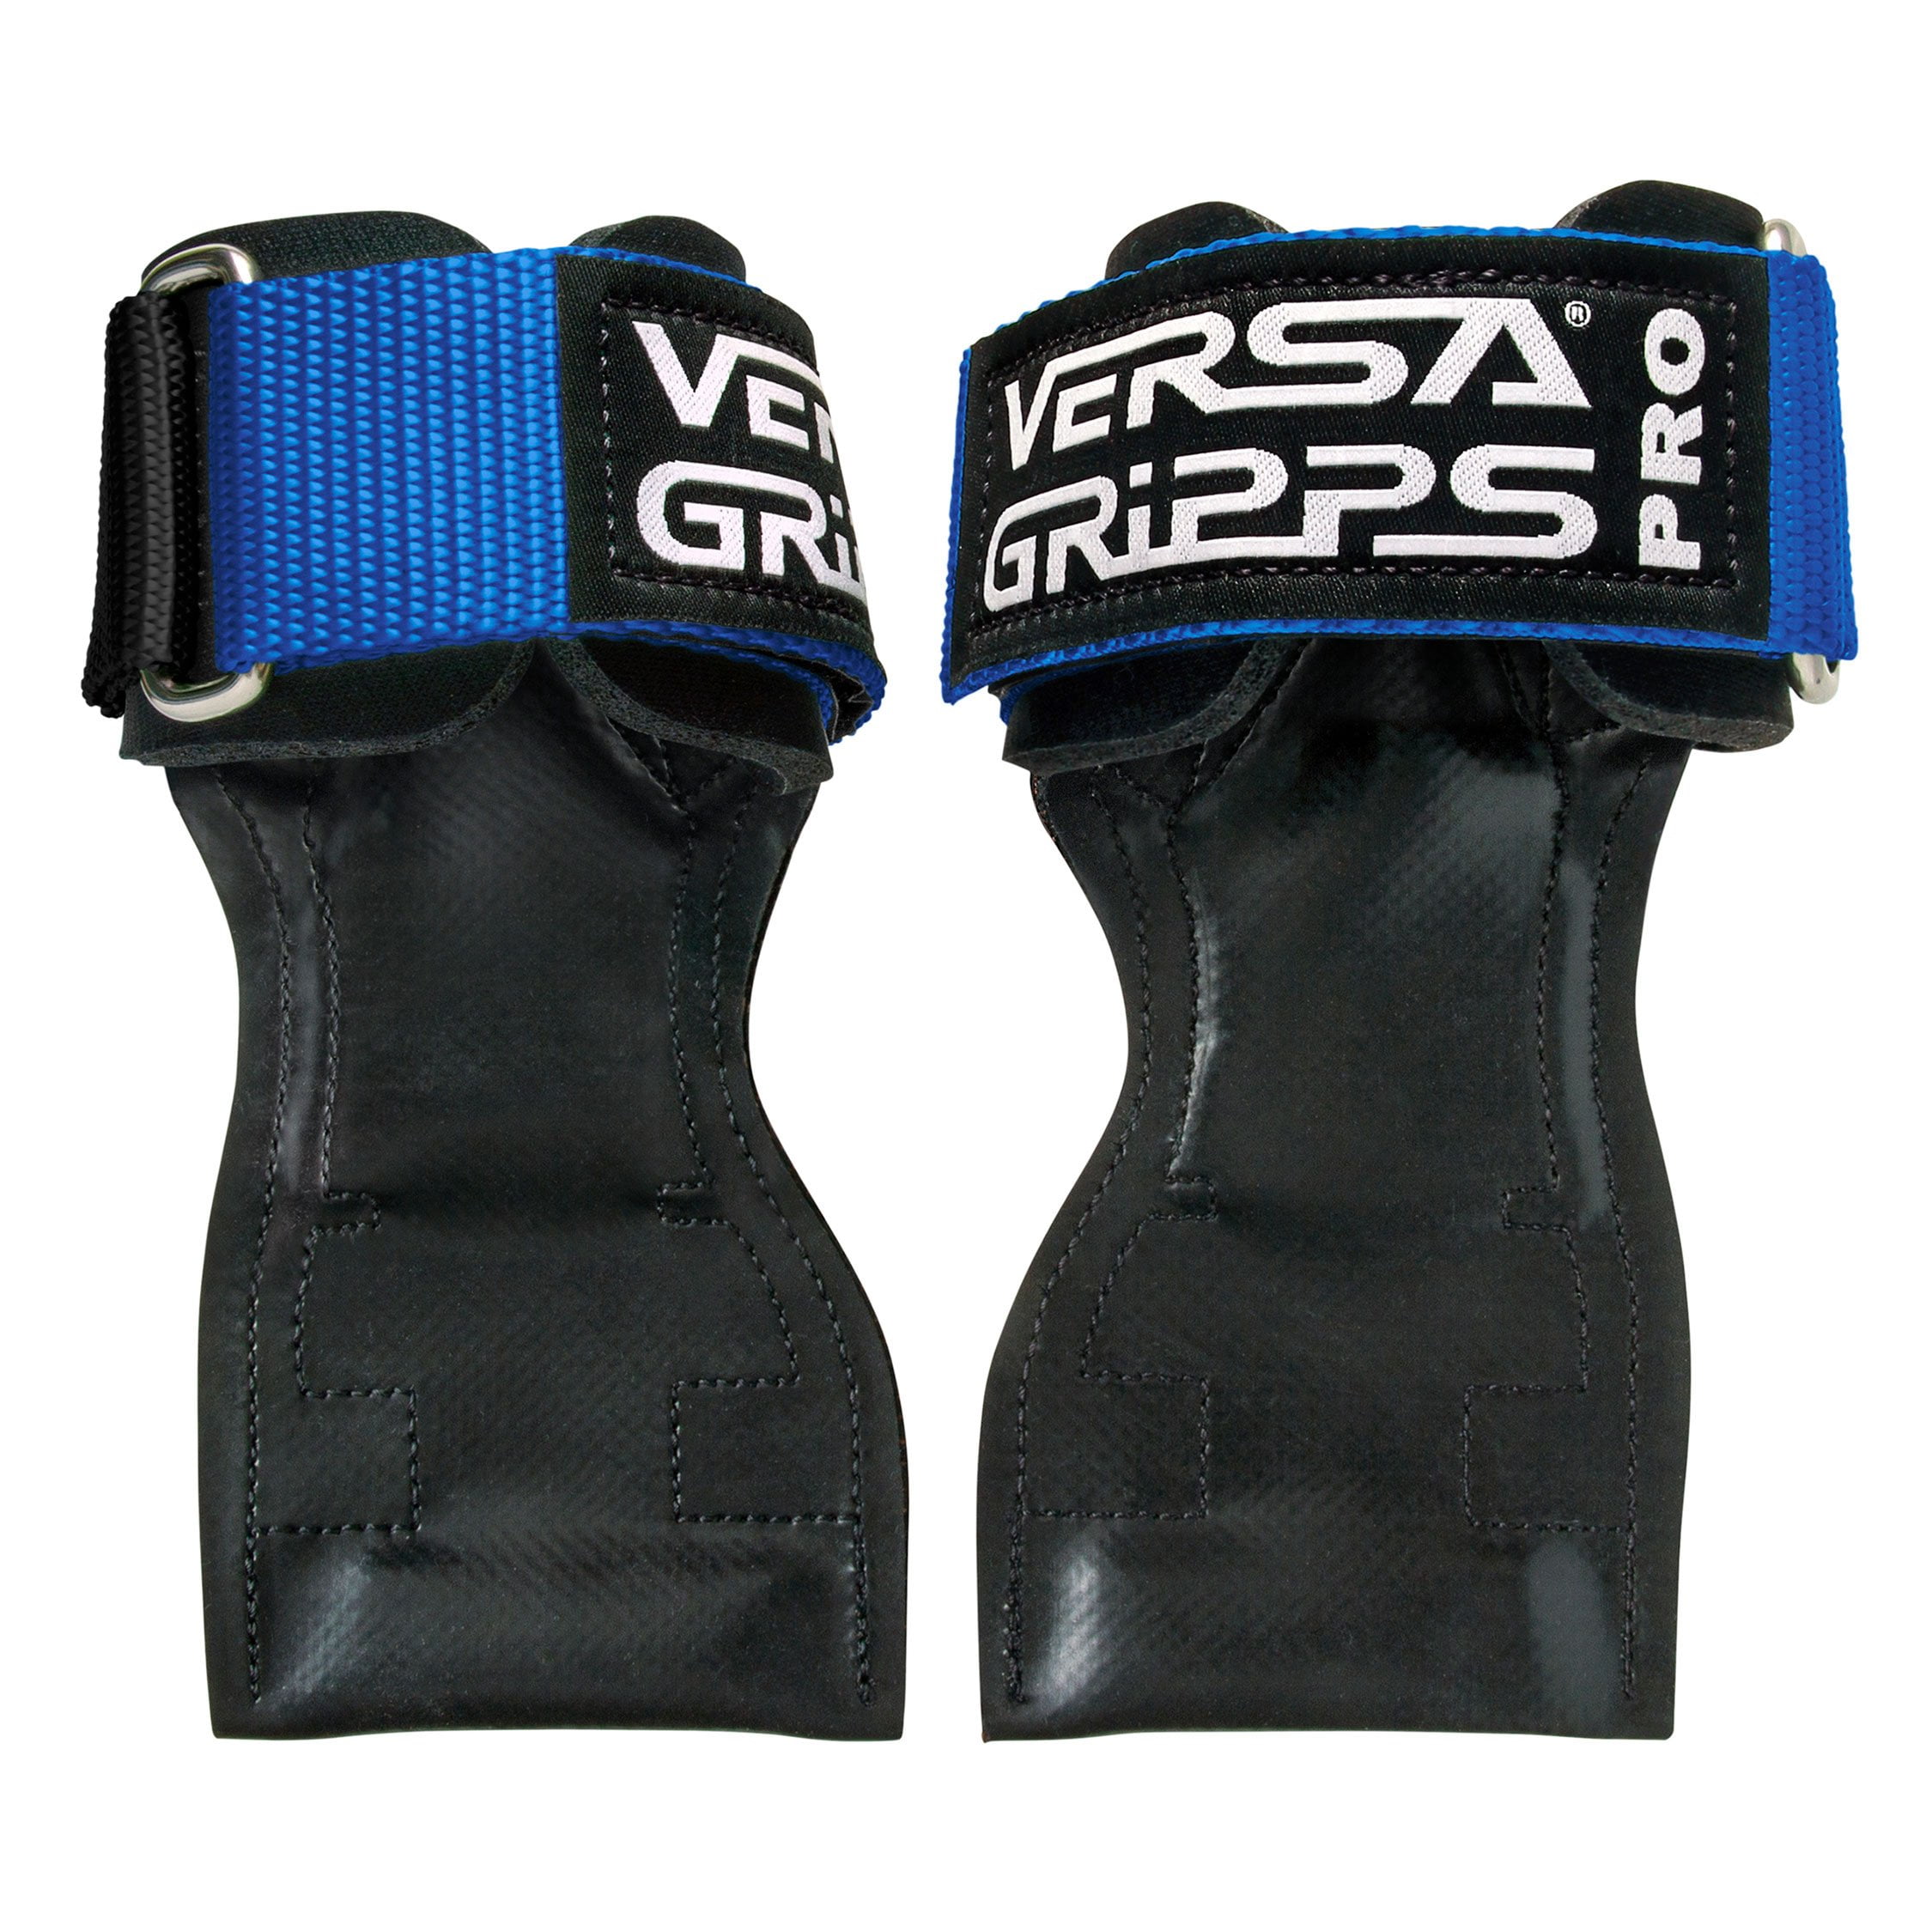 Versa Gripps PRO Authentic Weight Lifting Grip